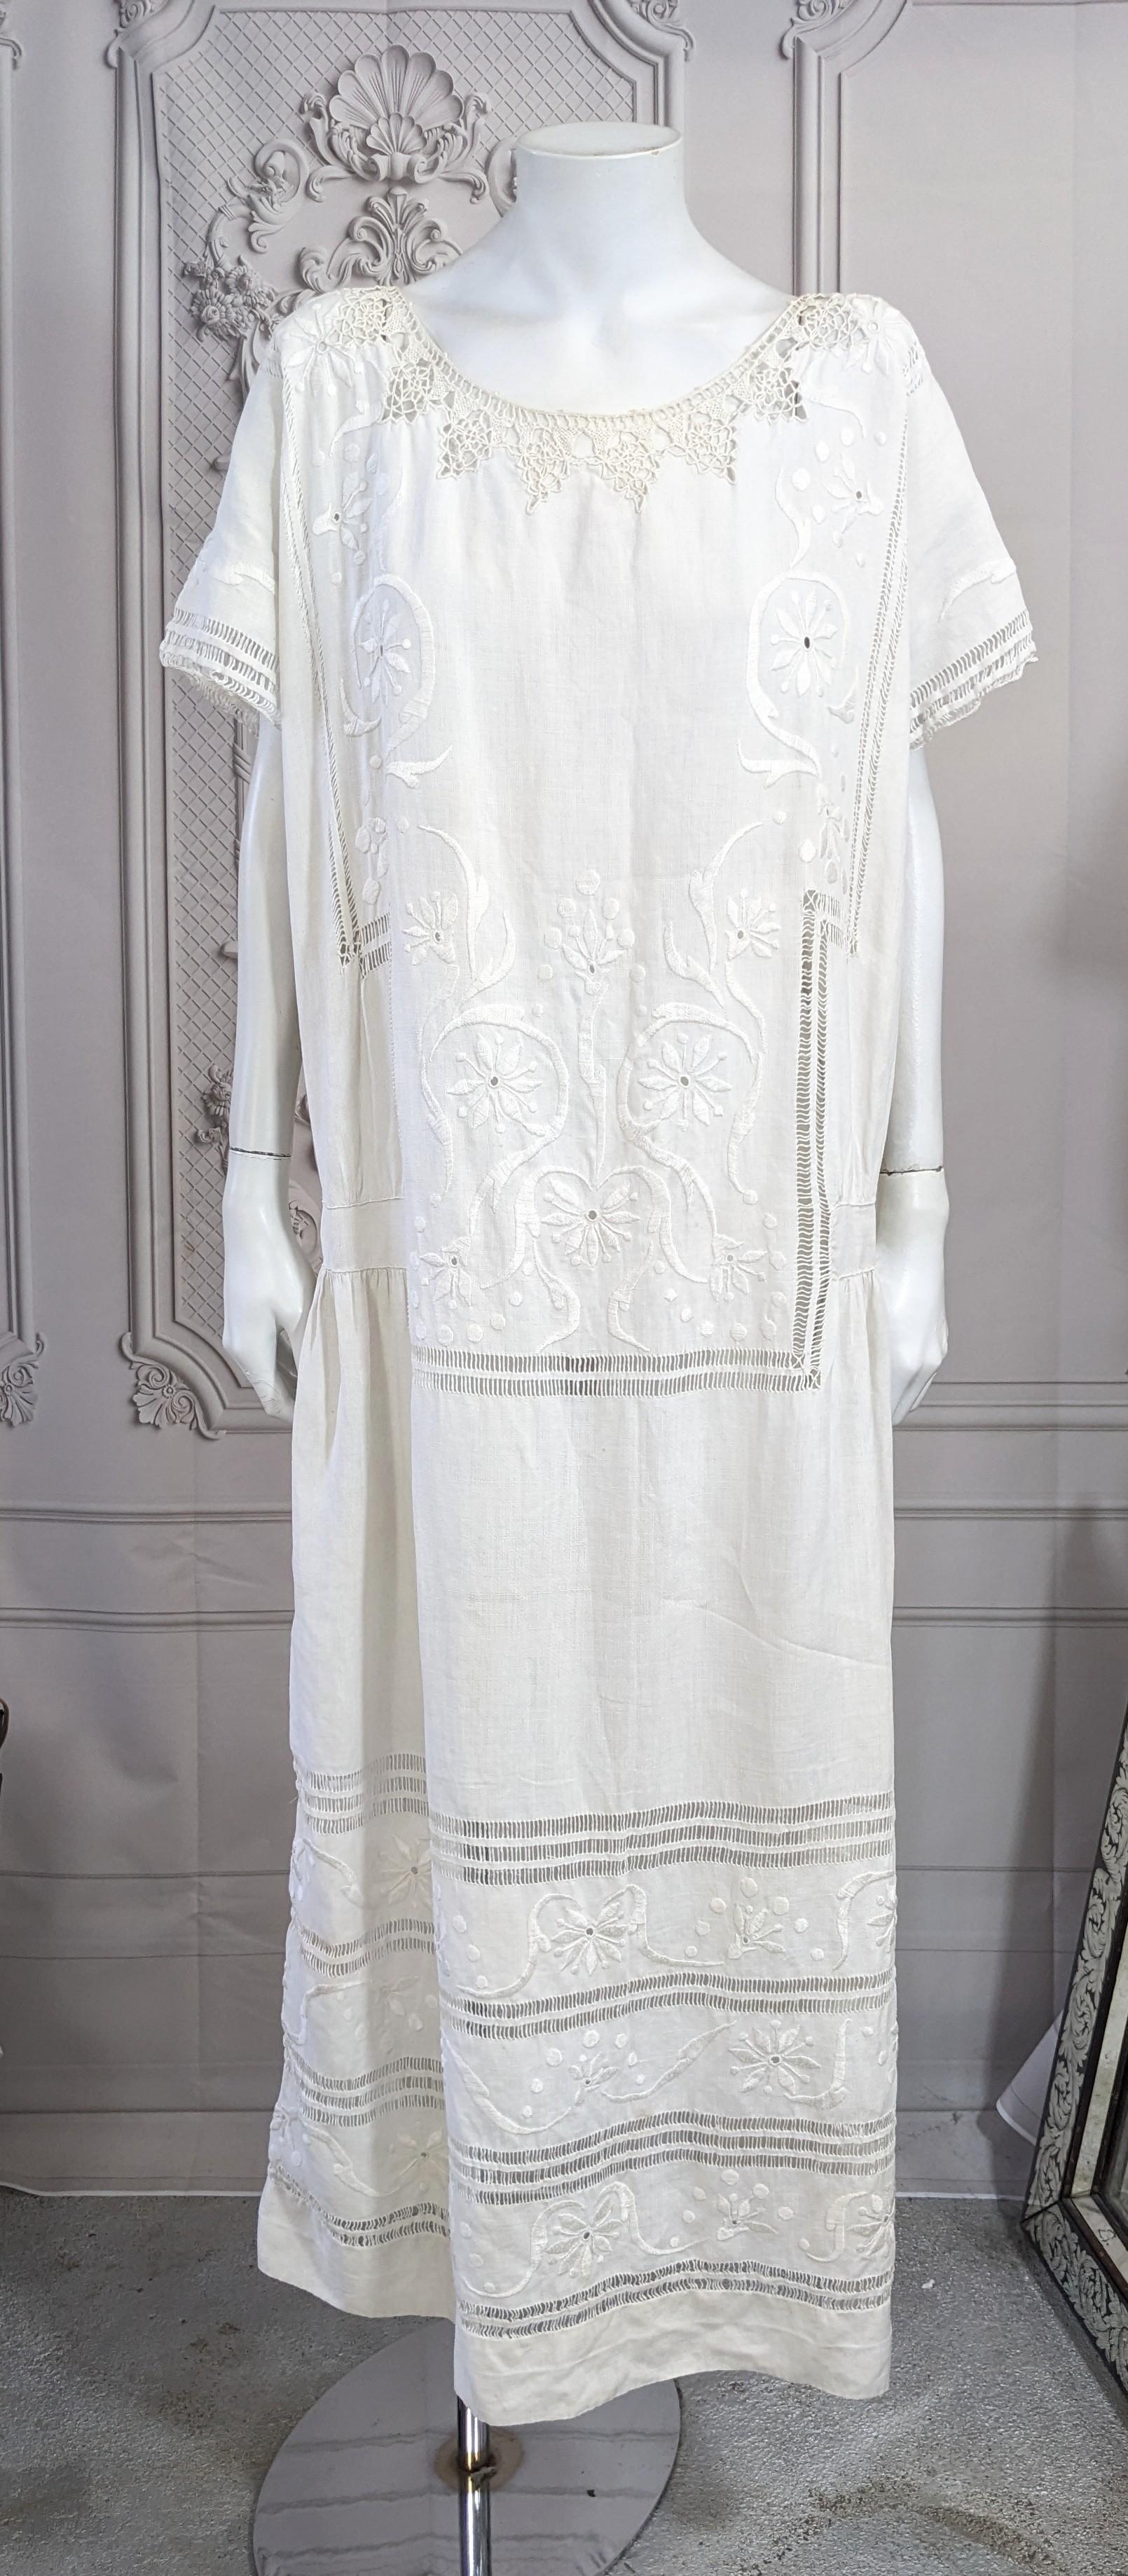 1920's Drop Waist Decorated Linen Dress hand embroidered with floral panels, faggoting and irish crochet open work at neckline. Large easy size, fits like tube with some gathers at hip. Wonderful period hand work. 
1920's USA. Bust 42